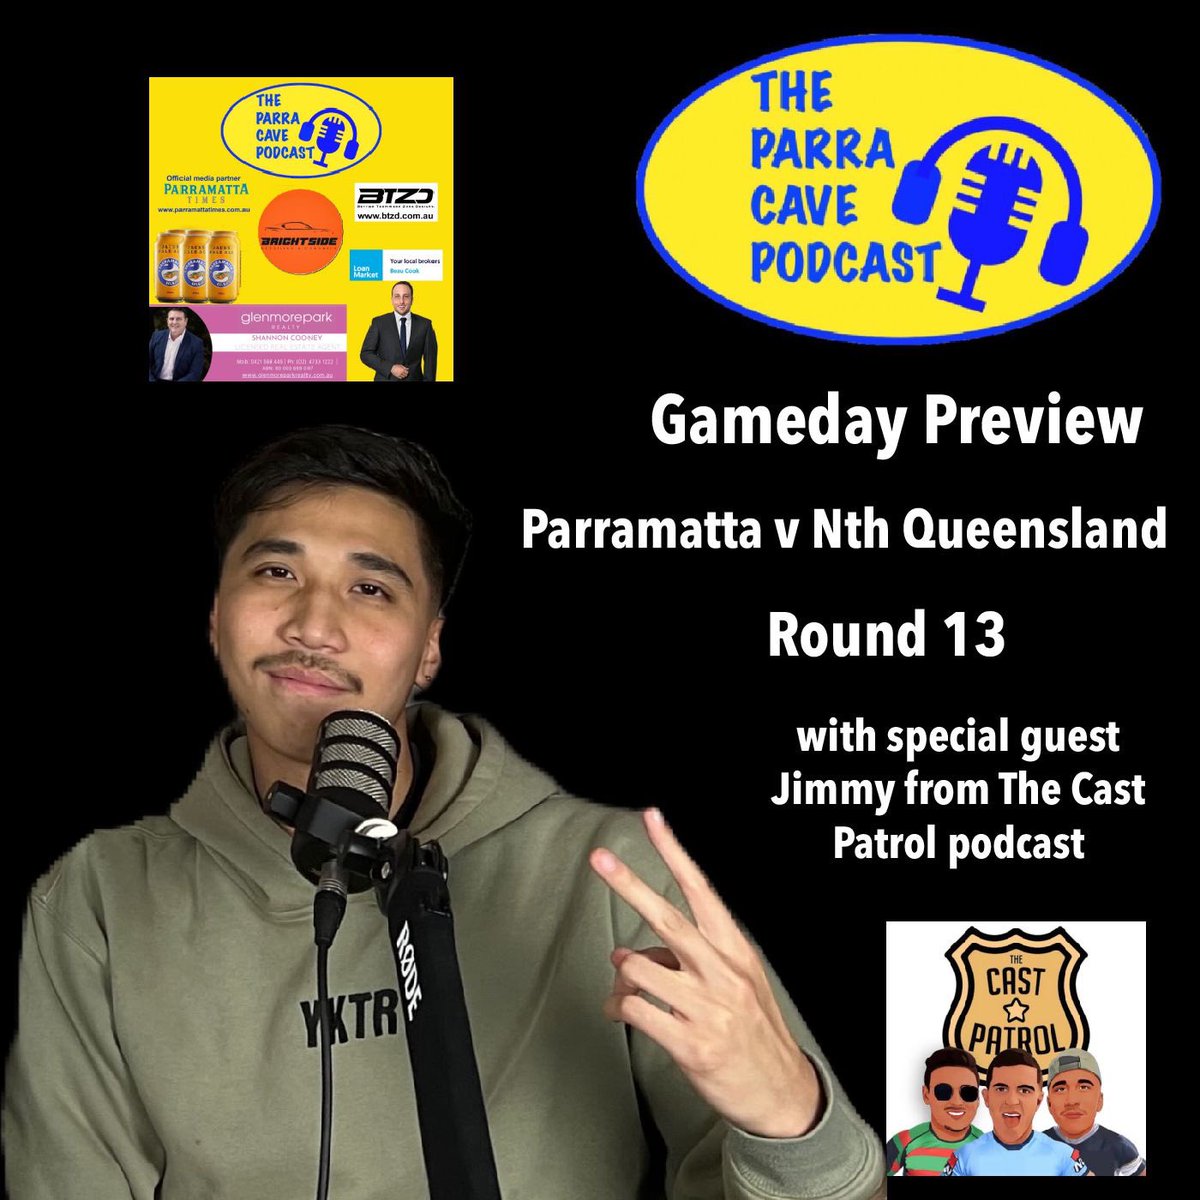 Out now a gameday preview of the @nthqldcowboys and @TheParraEels @commbankstadium tonight 8pm with Jimmy from @thecastpatrol 

🎧 - linktr.ee/TheParraCavePo…